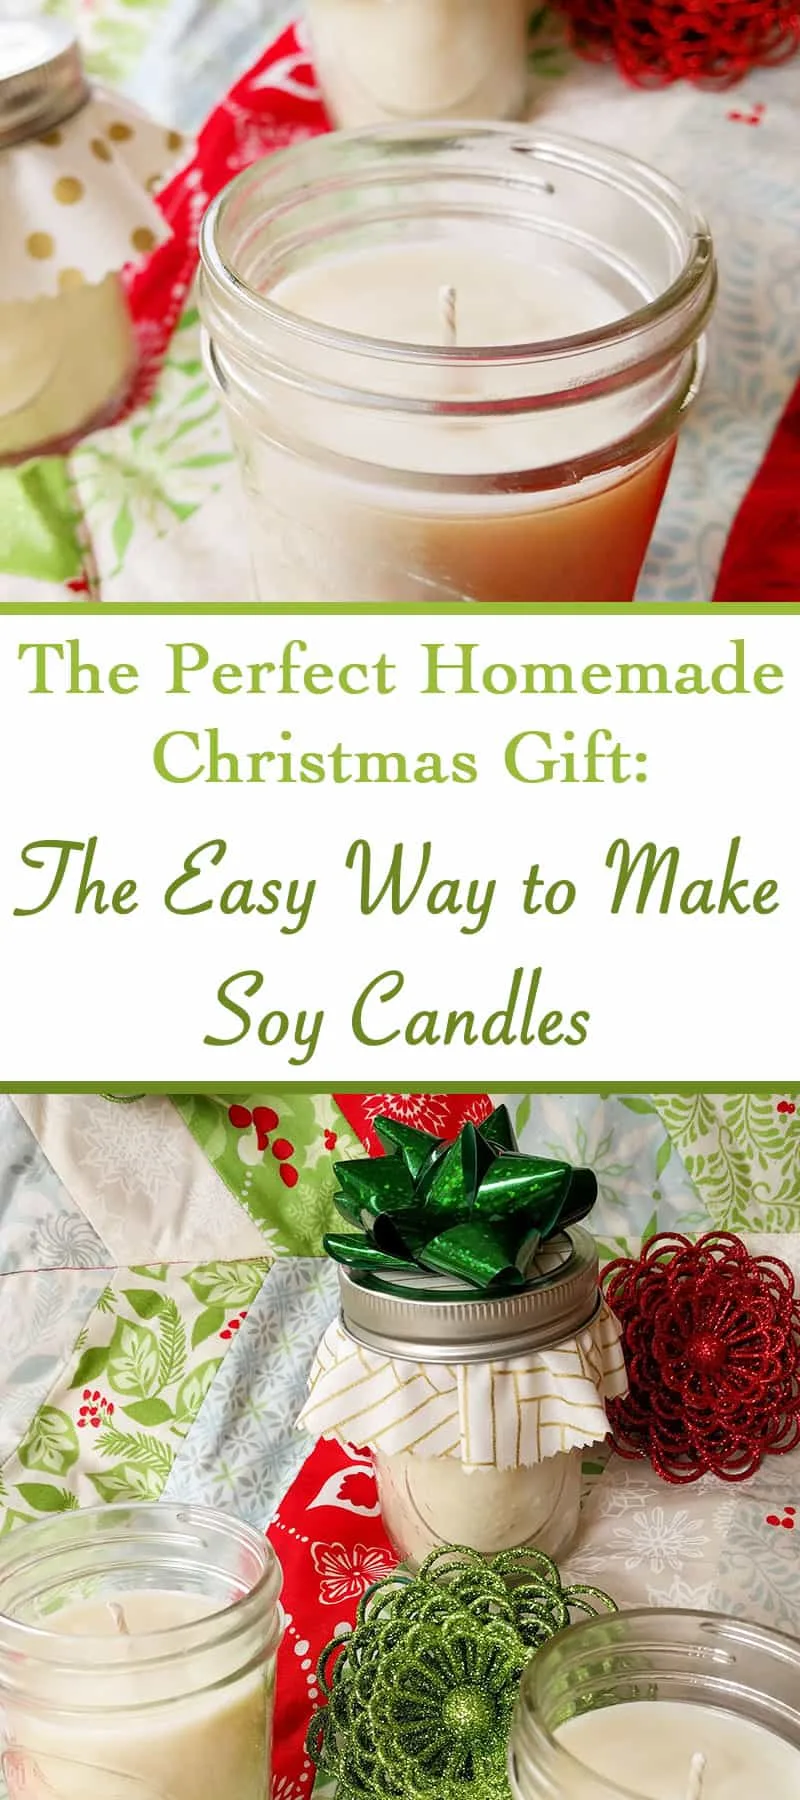 How to Make Your Own Soy Candles: Full Tutorial